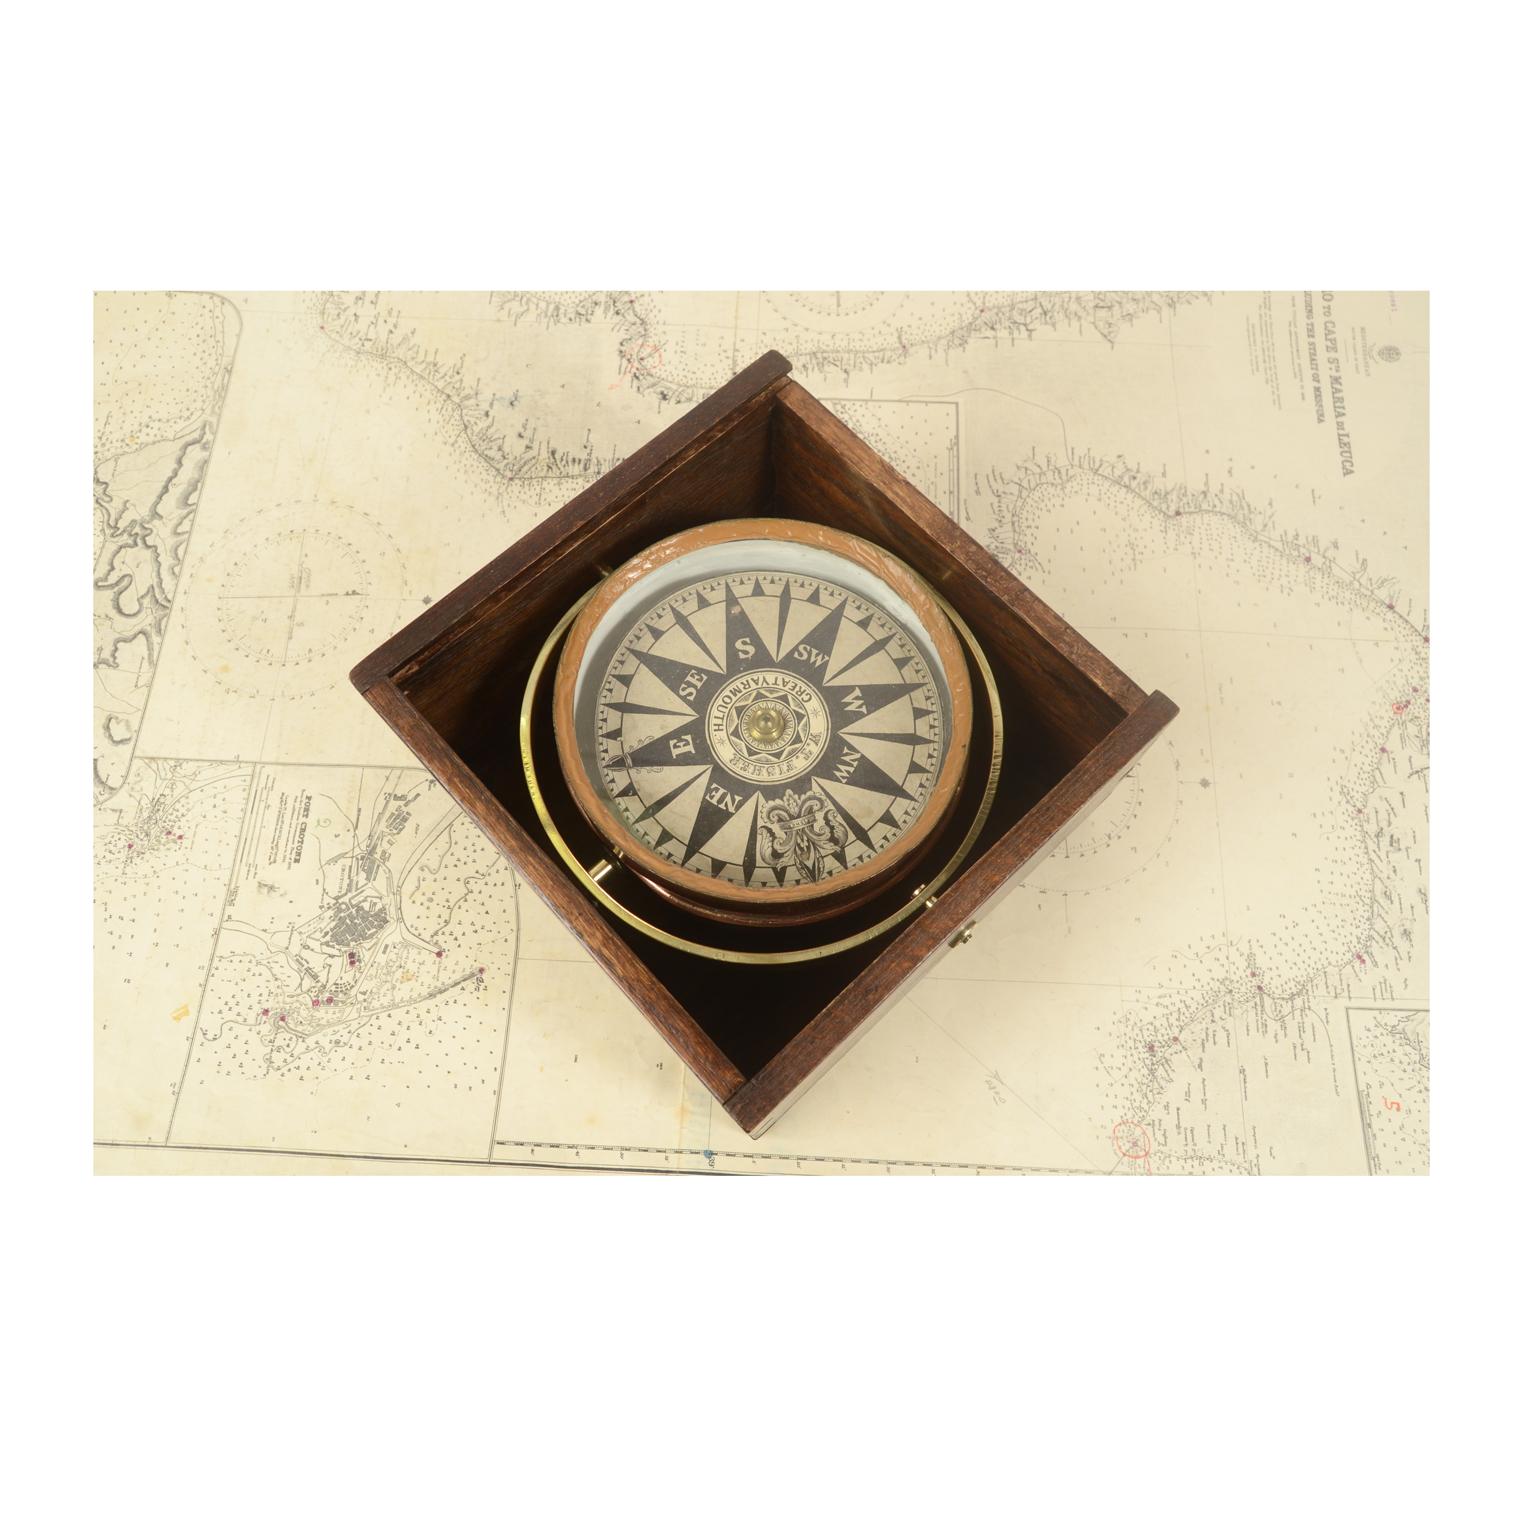 Compass in its original wooden box with slot lid. Signed W. T. FISHER Great Yarmouth, mid 19th century. The compass is made up of a copper container with a lead and glass counterweight on the bottom of which is fixed a metal stem on which the eight